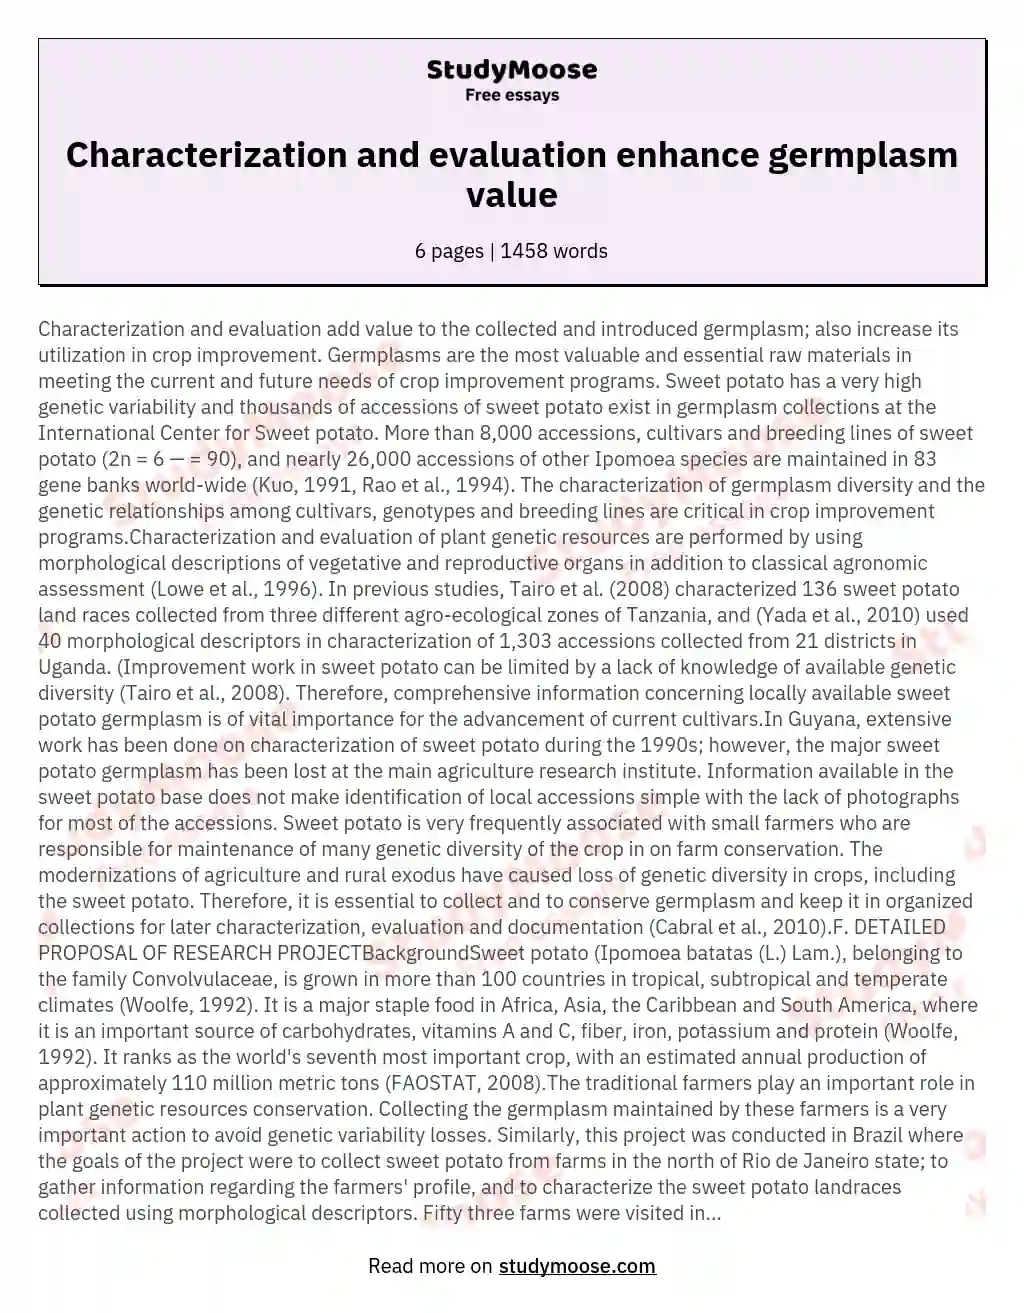 Characterization and evaluation add value to the collected and introduced germplasm also